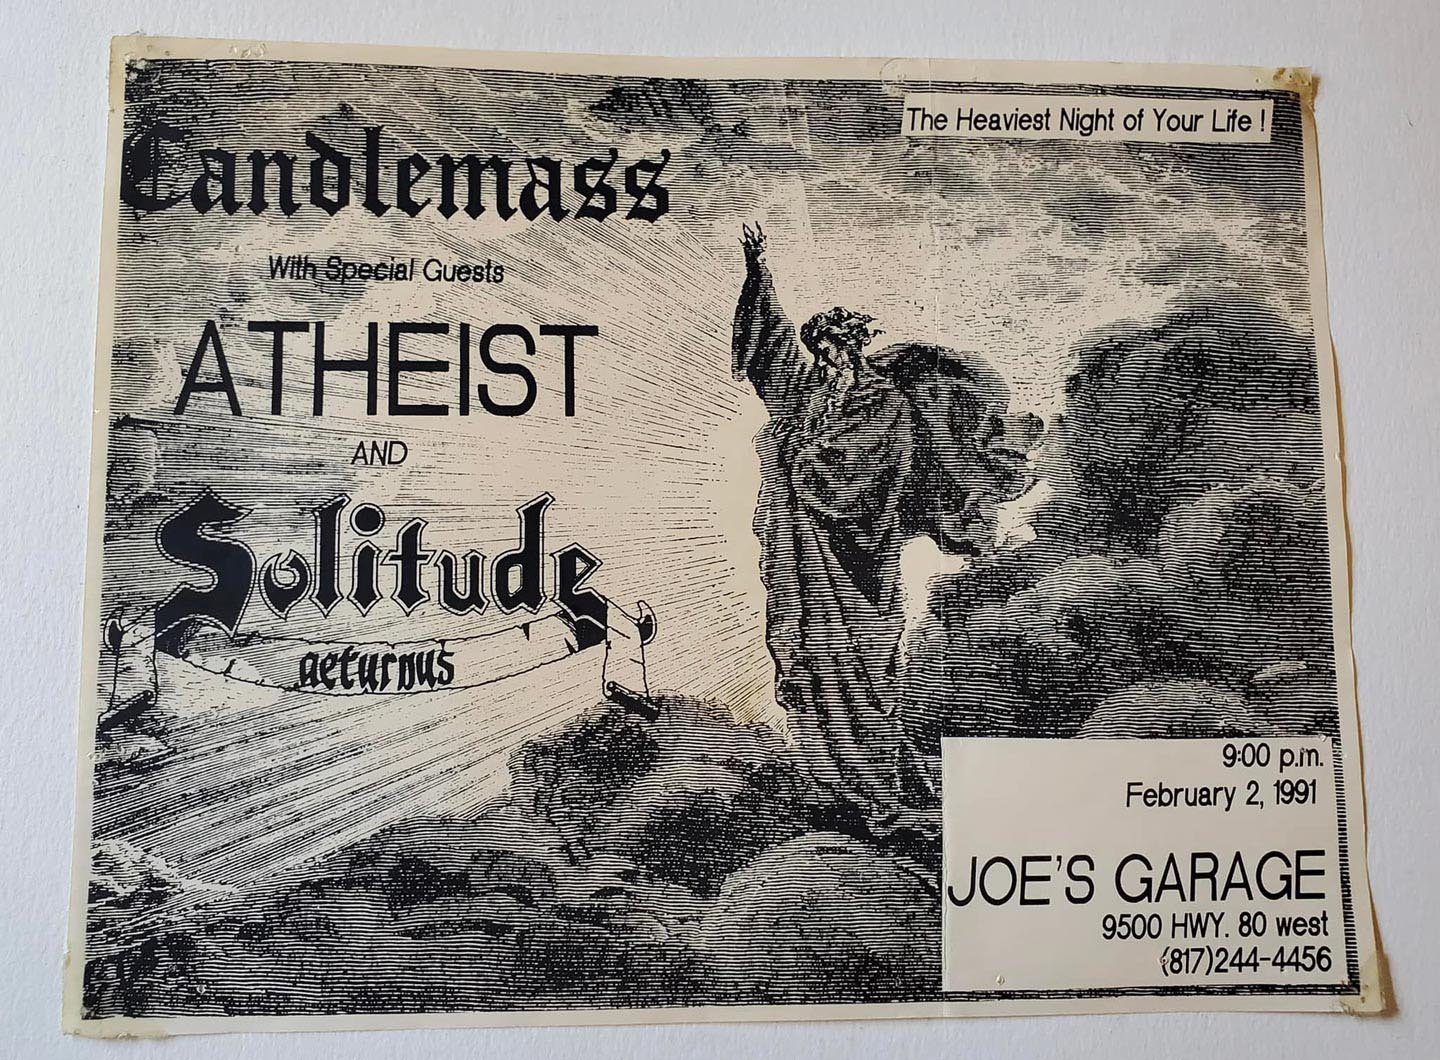 Solitude Aeturnus Flyer, Show with Candlemass and Atheist (1991-02-02)